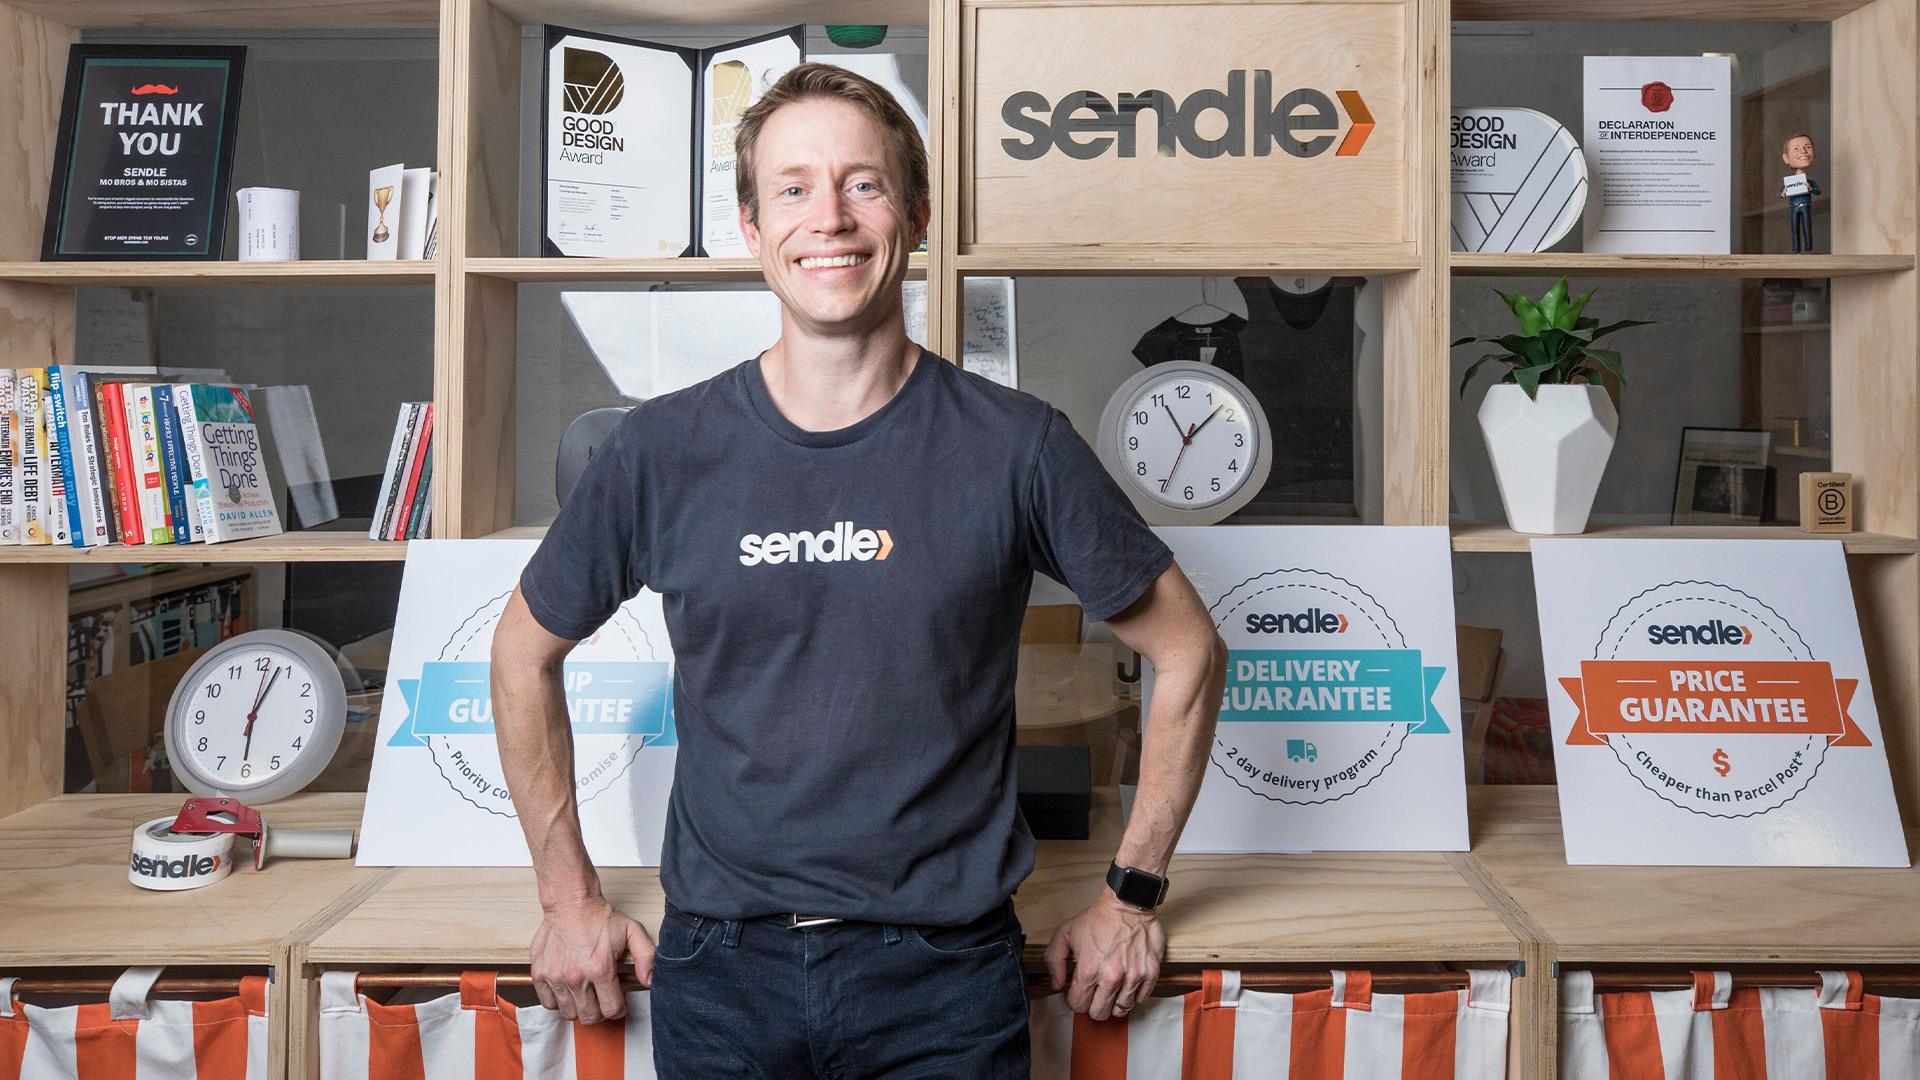 Sendle CEO Founder, James Chin Moody standing behind the books shelf